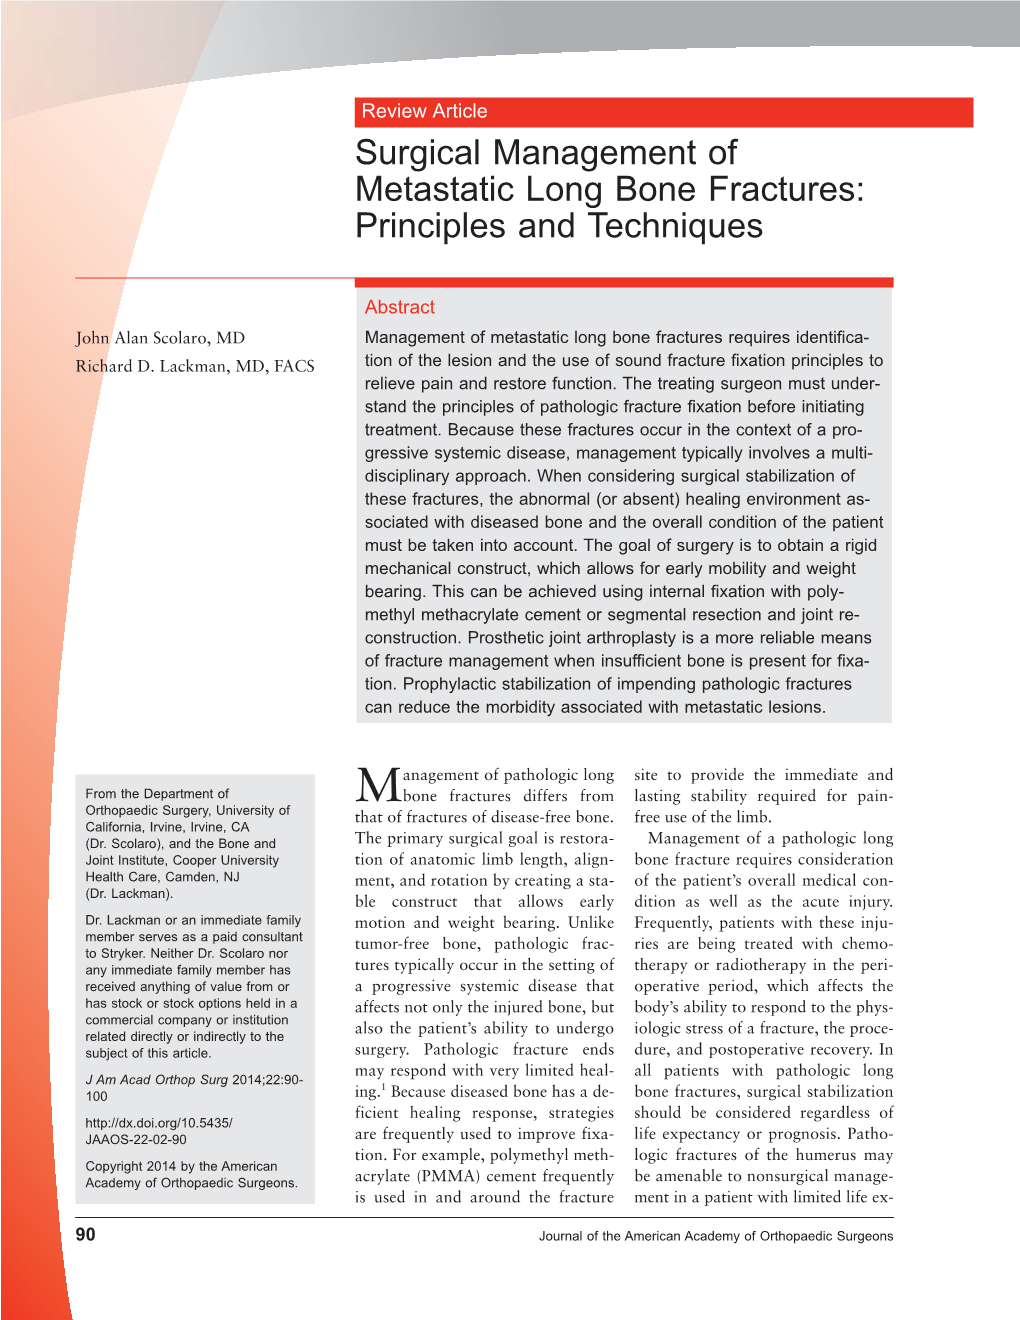 Surgical Management of Metastatic Long Bone Fractures: Principles and Techniques